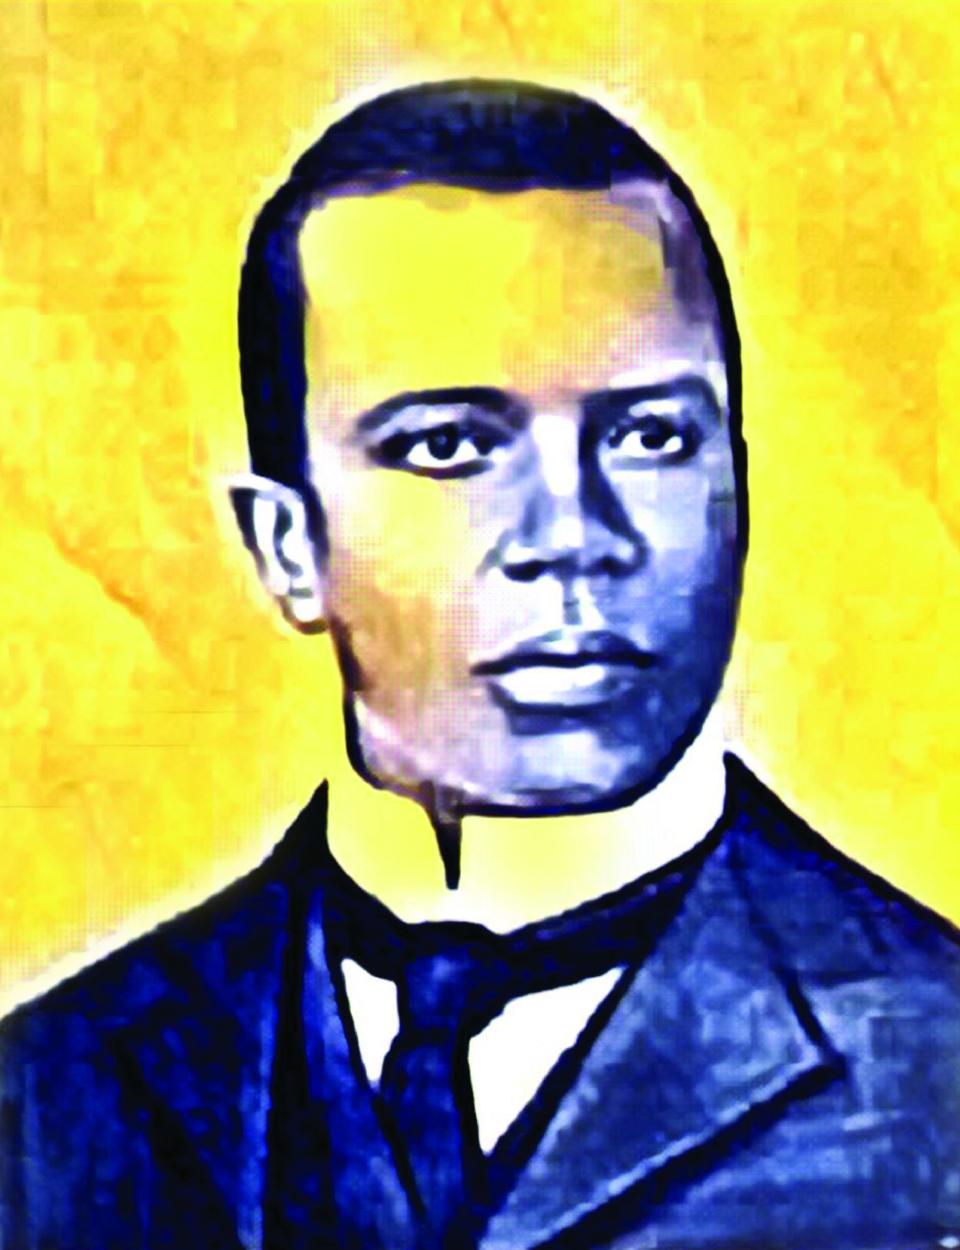 Scott Joplin, the "King of Ragtime," thought his music should be played elegantly